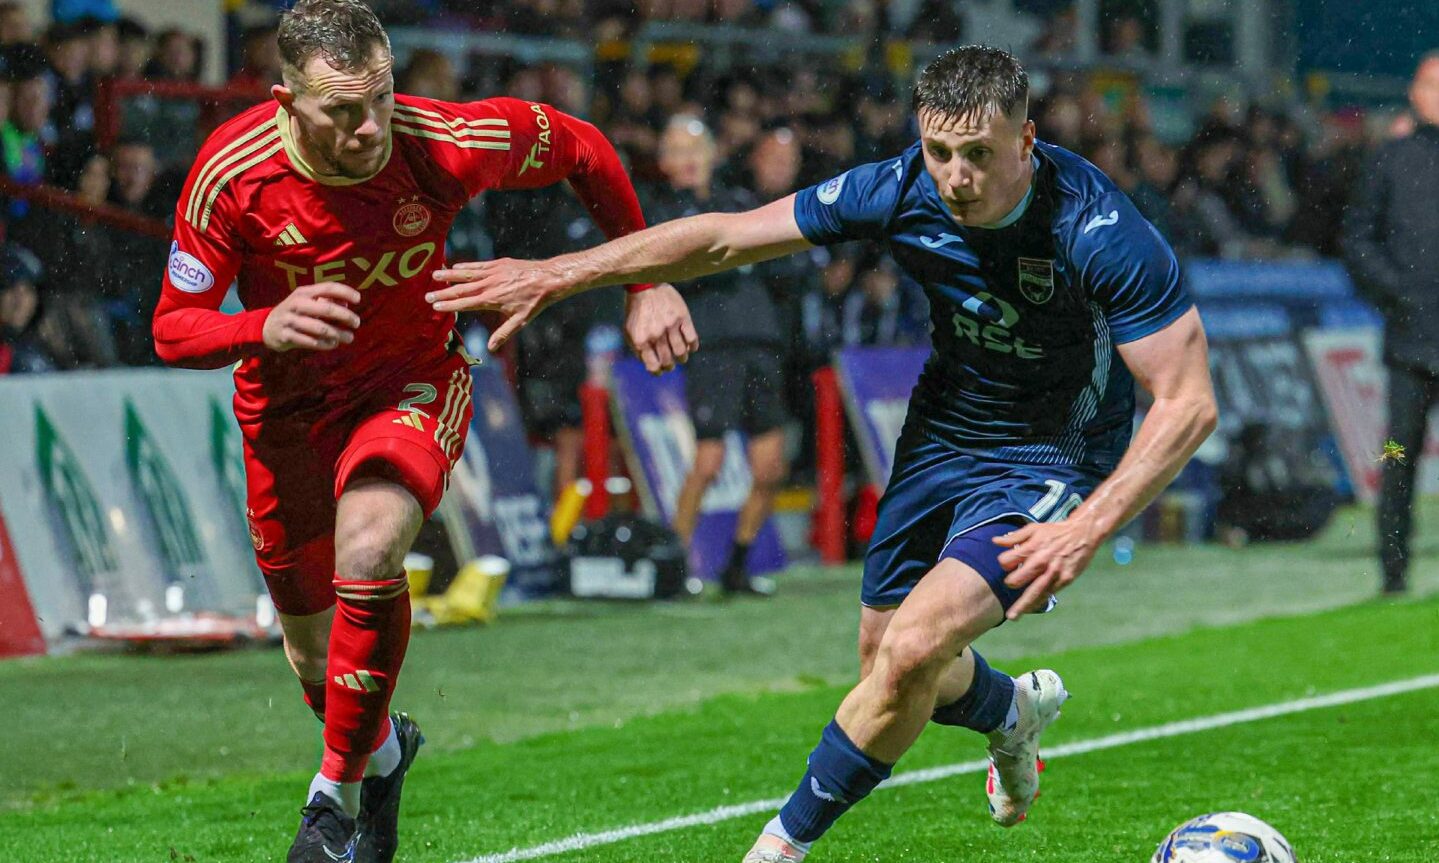 Aberdeen's Nicky Devlin chasing the ball, with a ross county player beside him